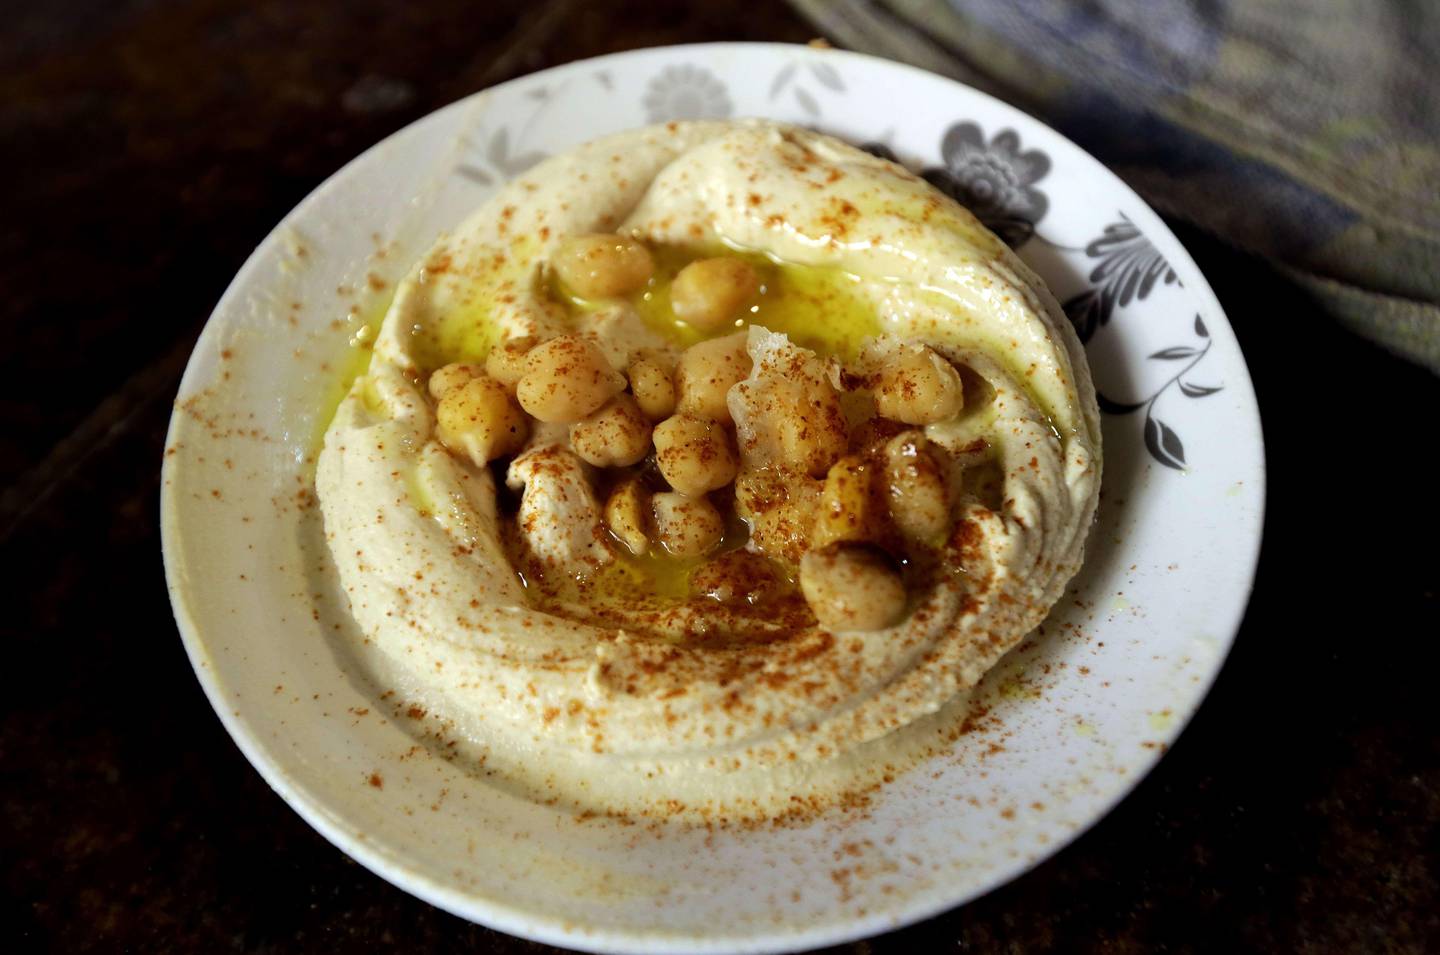 A plate of Hummus is served  at a restaurant in the Lebanese coastal city of Tripoli, north of Beirut on October 20, 2014. Hummus is a Levantine food dip or spread made from mashed chickpeas blended with tahini, olive oil, lemon juice, salt and garlic. Today, it is popular throughout the Middle East, North Africa, and in Middle Eastern cuisine around the globe. AFP PHOTO/JOSEPH EID